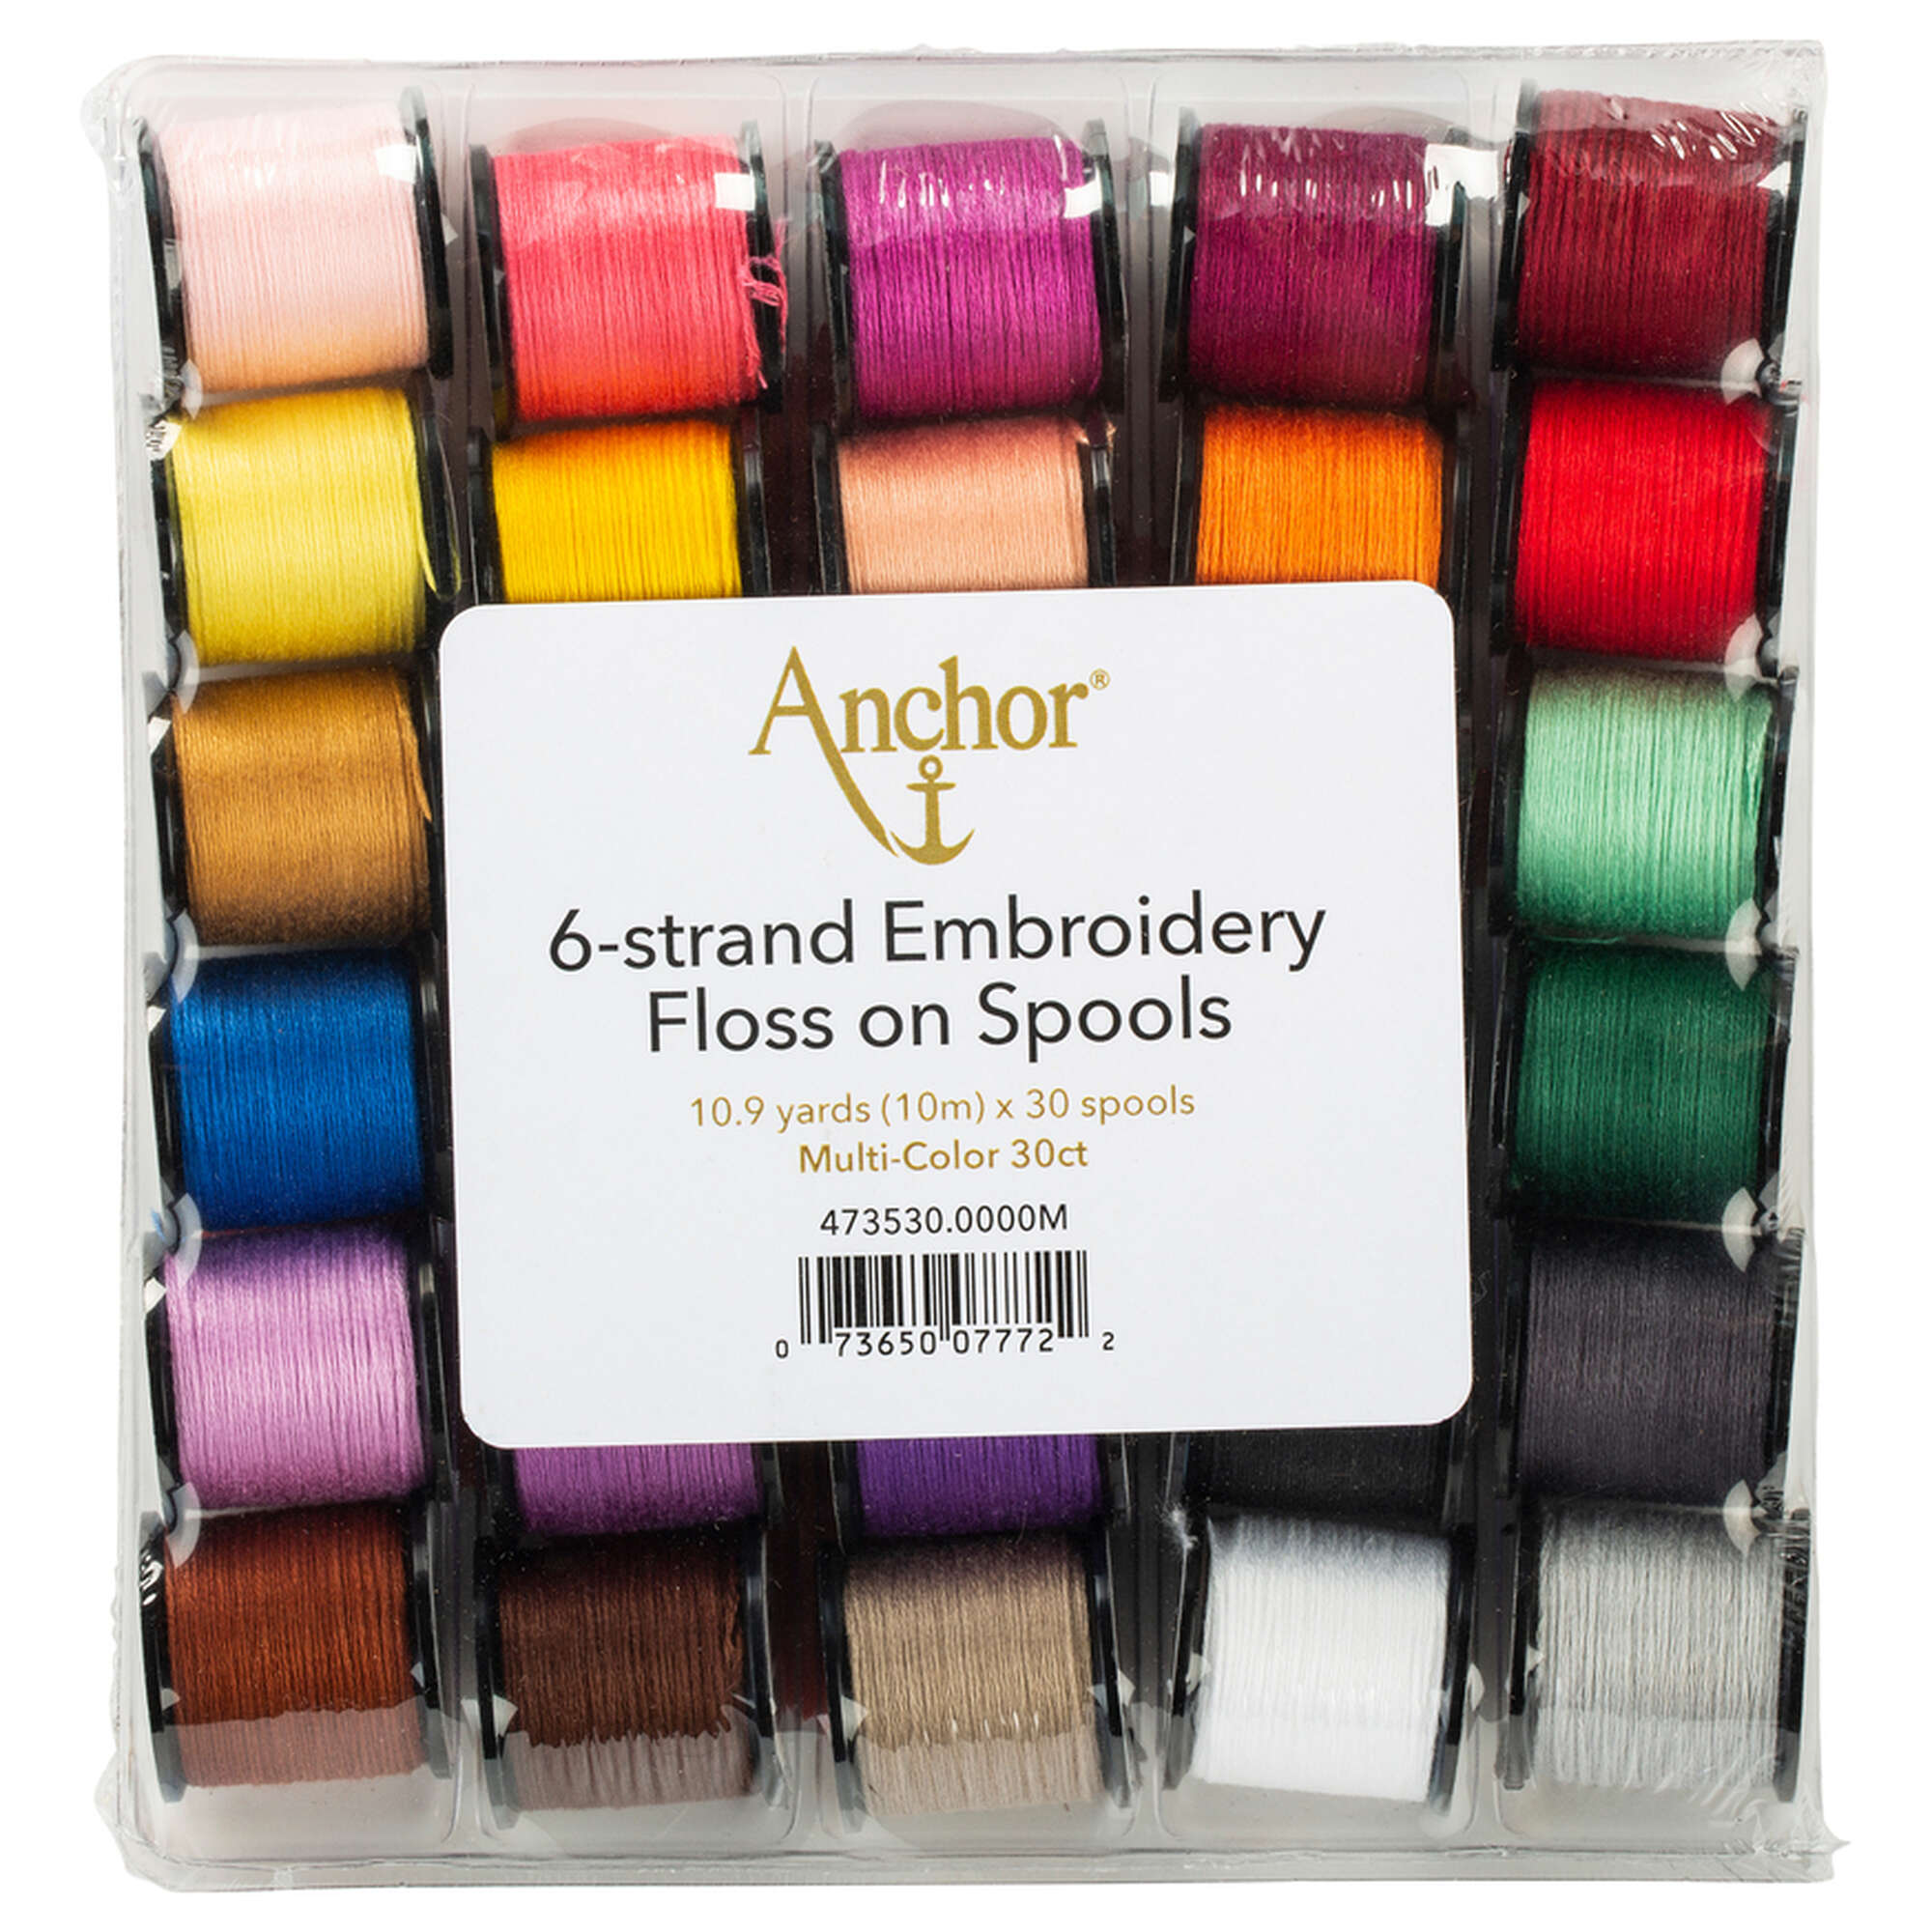 Anchor Embroidery Floss on Spools, 30 Pack | Yarnspirations